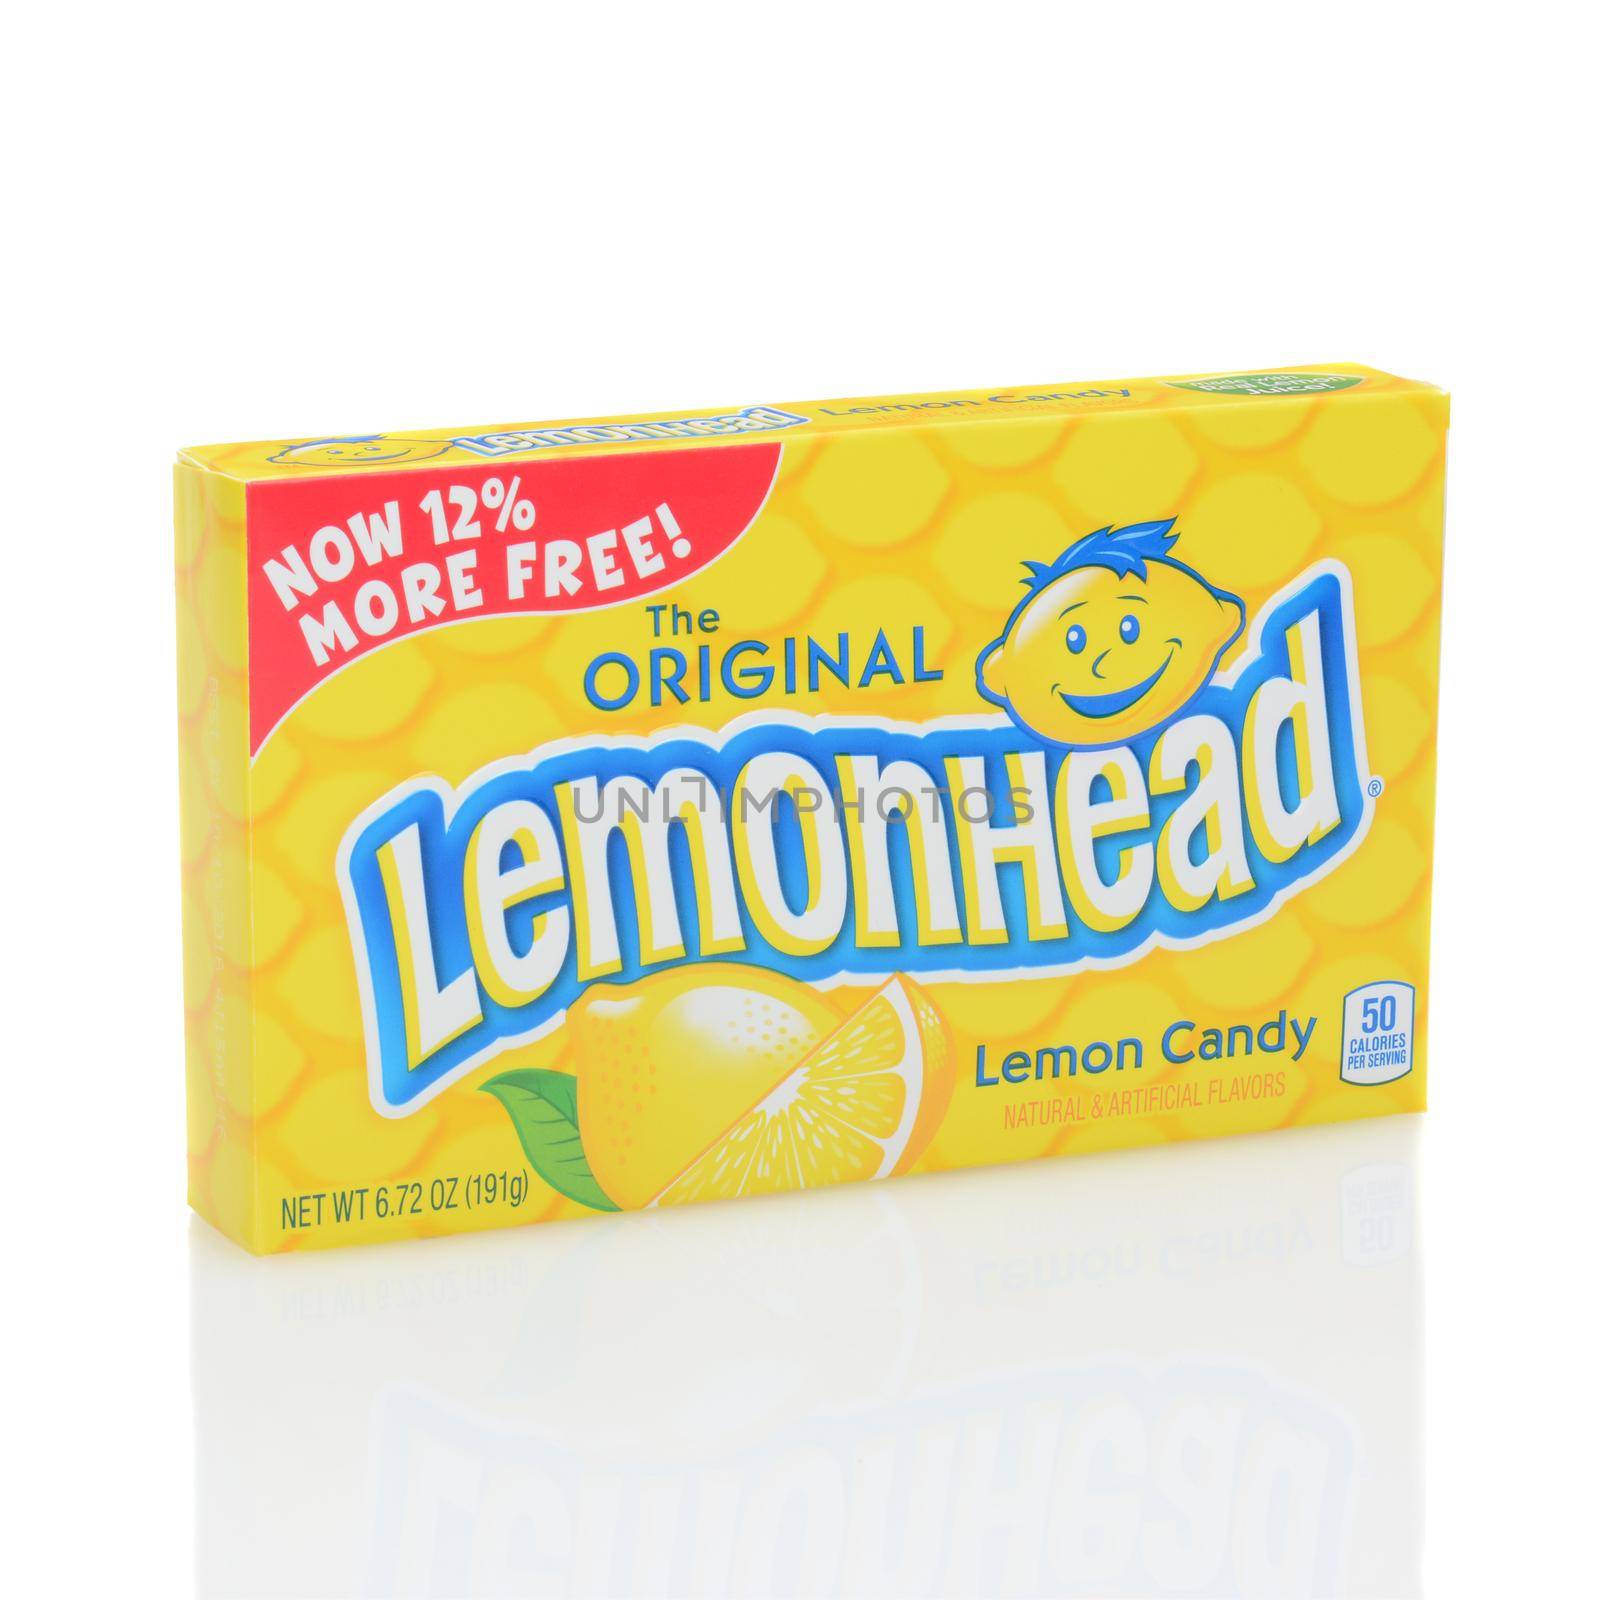 IRVINE, CALIFORNIA - DECEMBER 12, 2014: A box of Lemonhead Candy. Introduced in 1962 by the Ferrara Candy Company Lemonheads are a round lemon flavored candy.